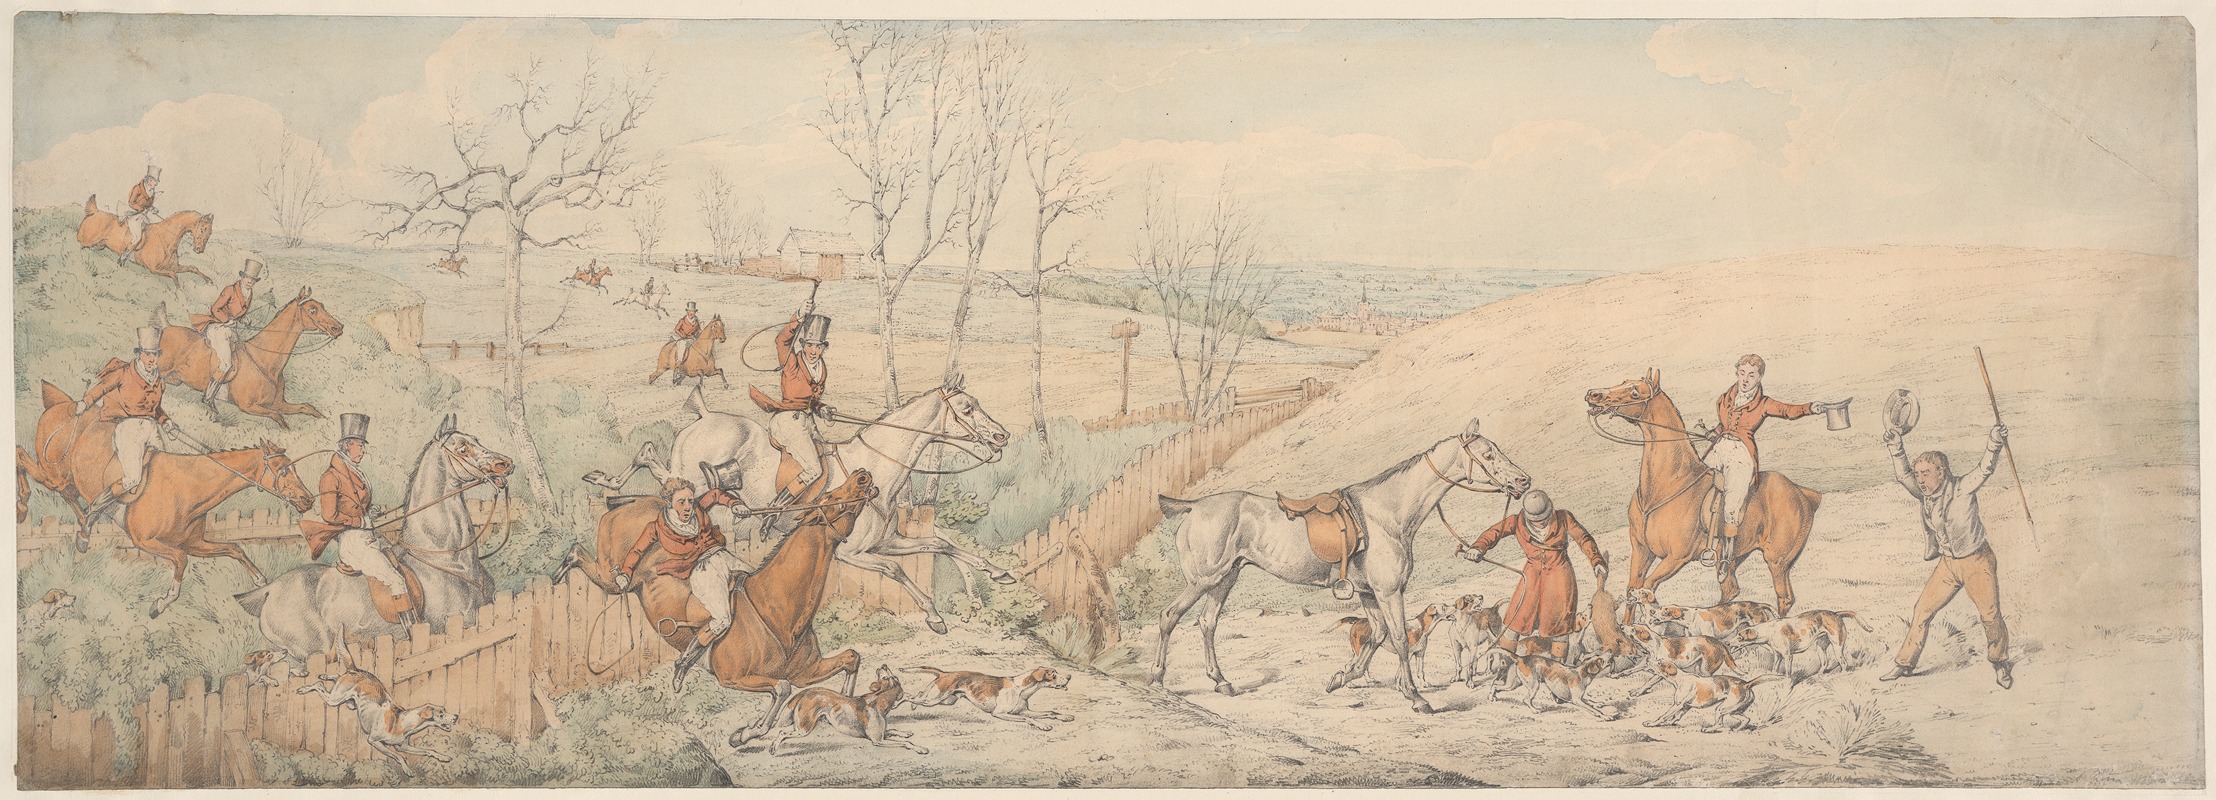 Henry Thomas Alken - Foxhunting; The Death